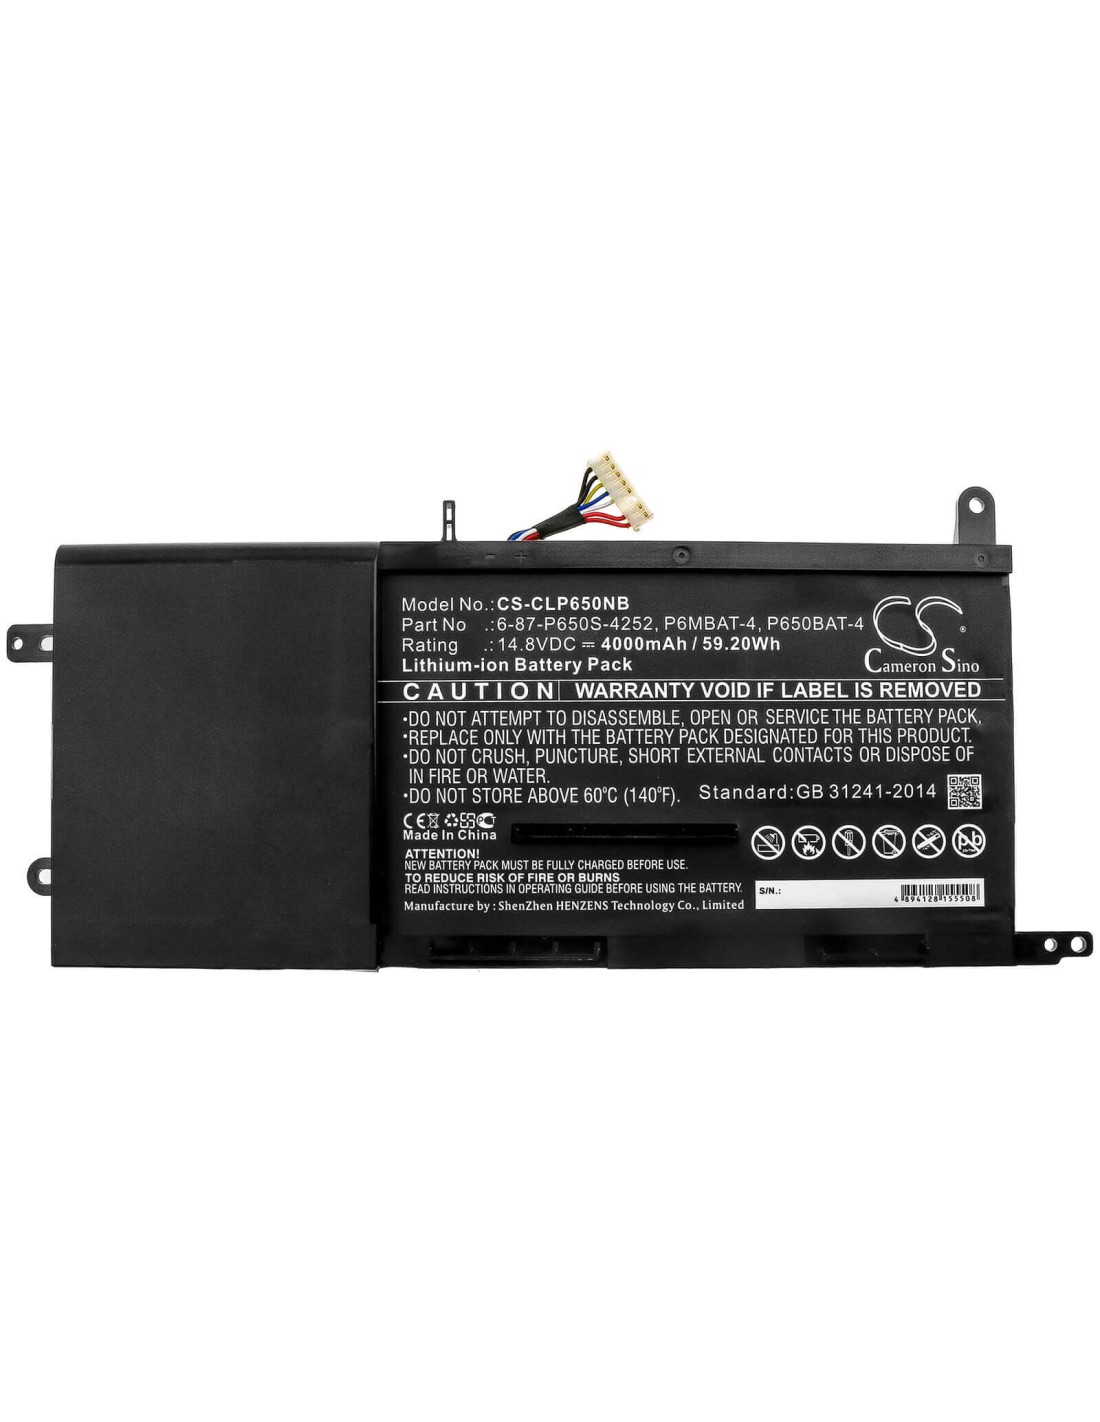 Battery for Advent, T5, Clevo, P650hp3-g 14.8V, 4000mAh - 59.20Wh